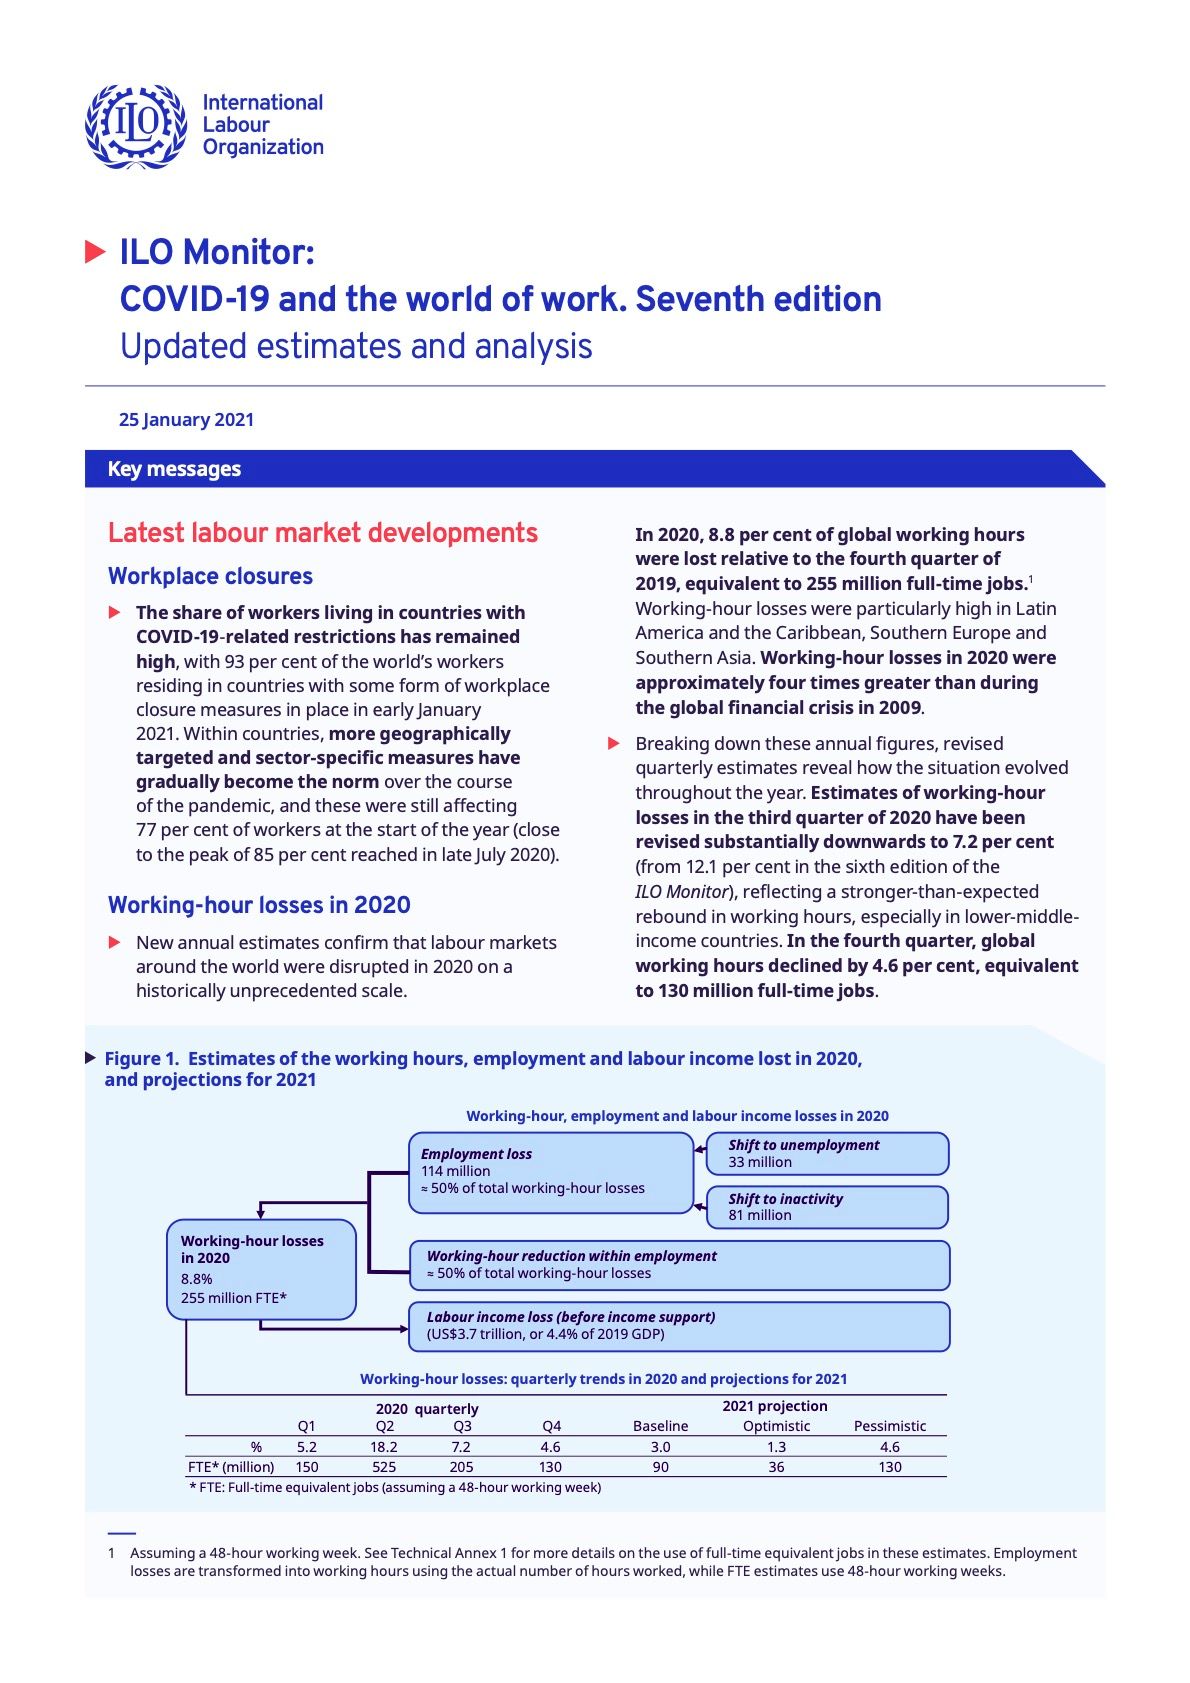 ILO Monitor: COVID-19 and the World of Work. Seventh edition